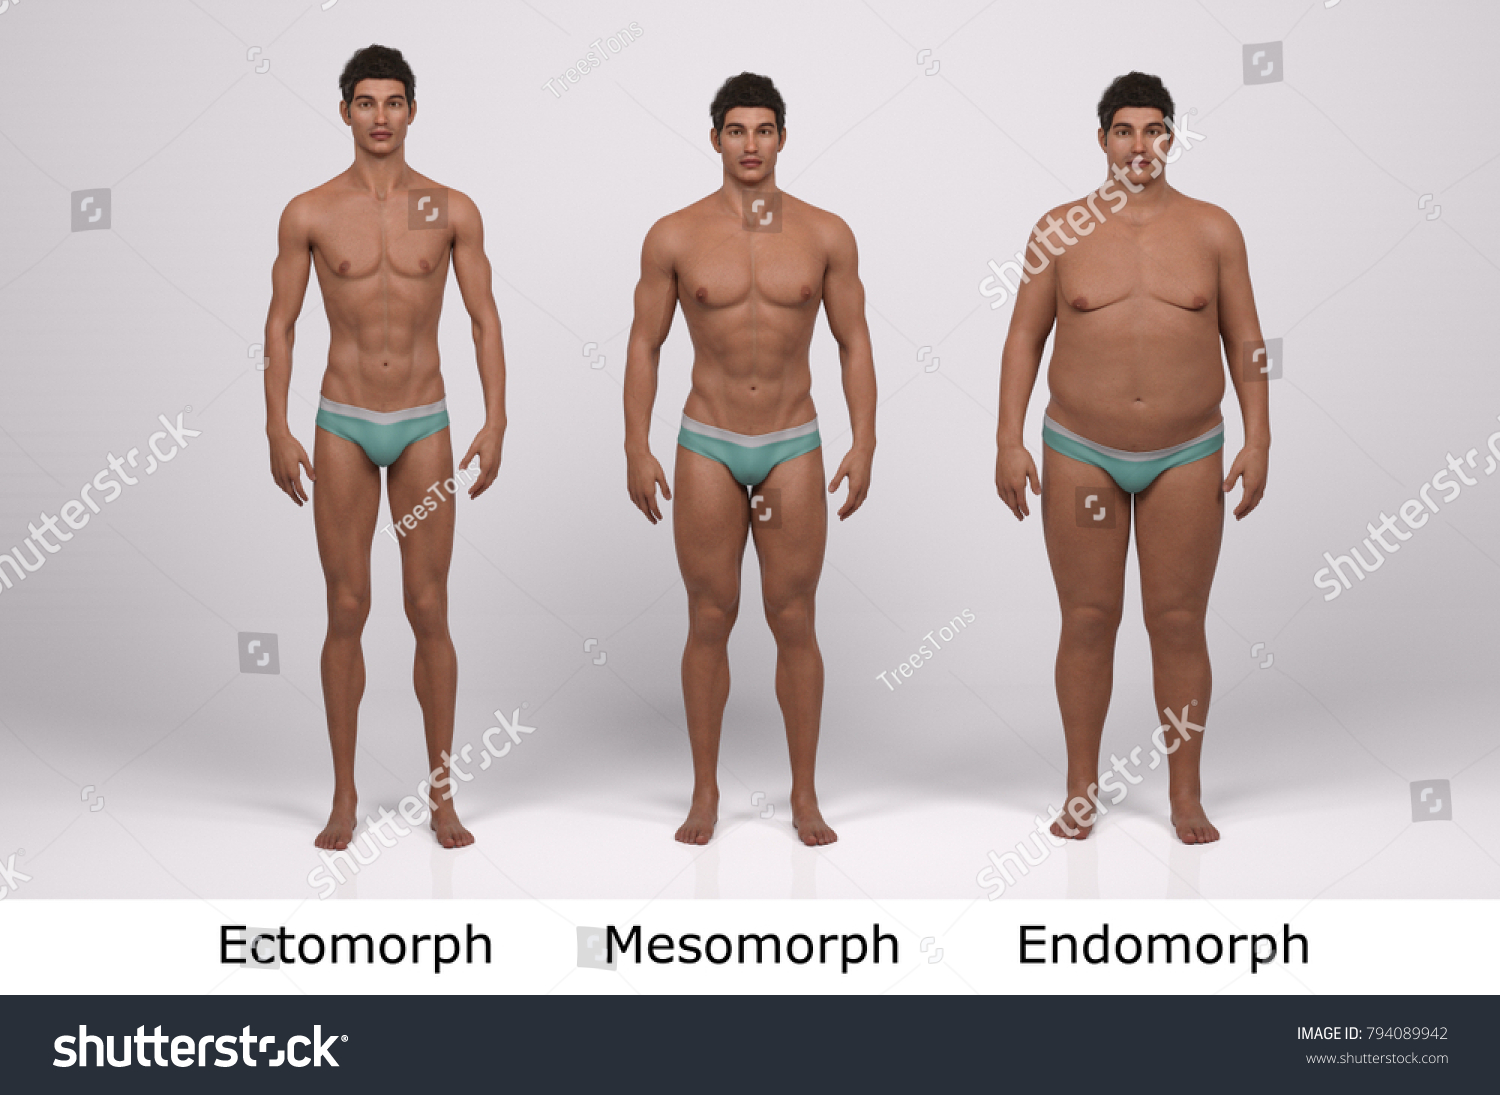 How to get the body of a male model